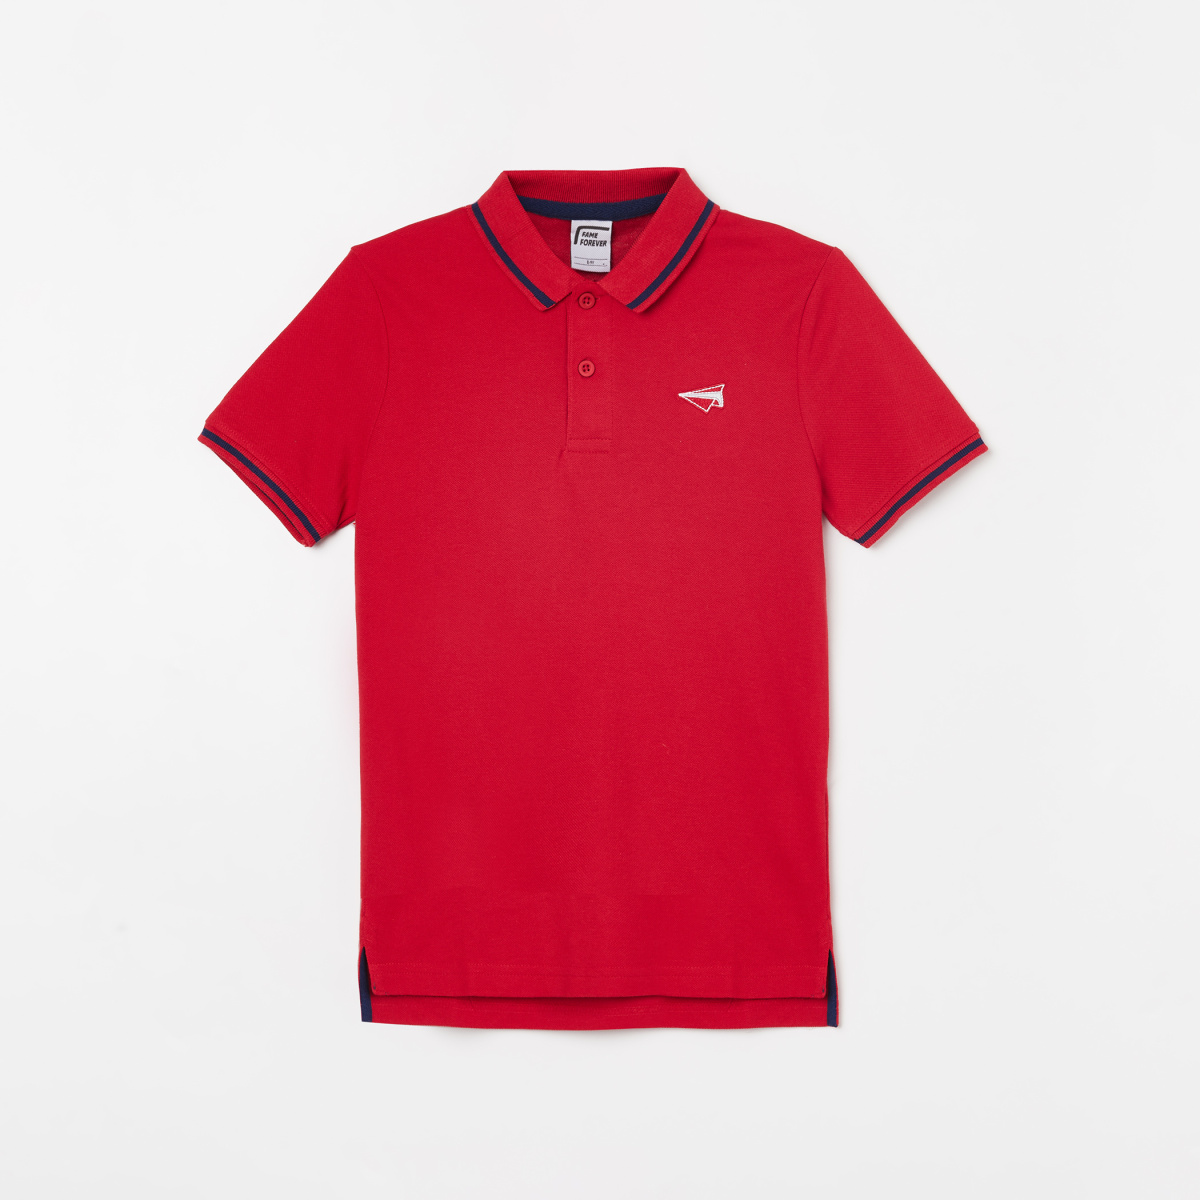 FAME FOREVER Boys Solid Polo T-shirt